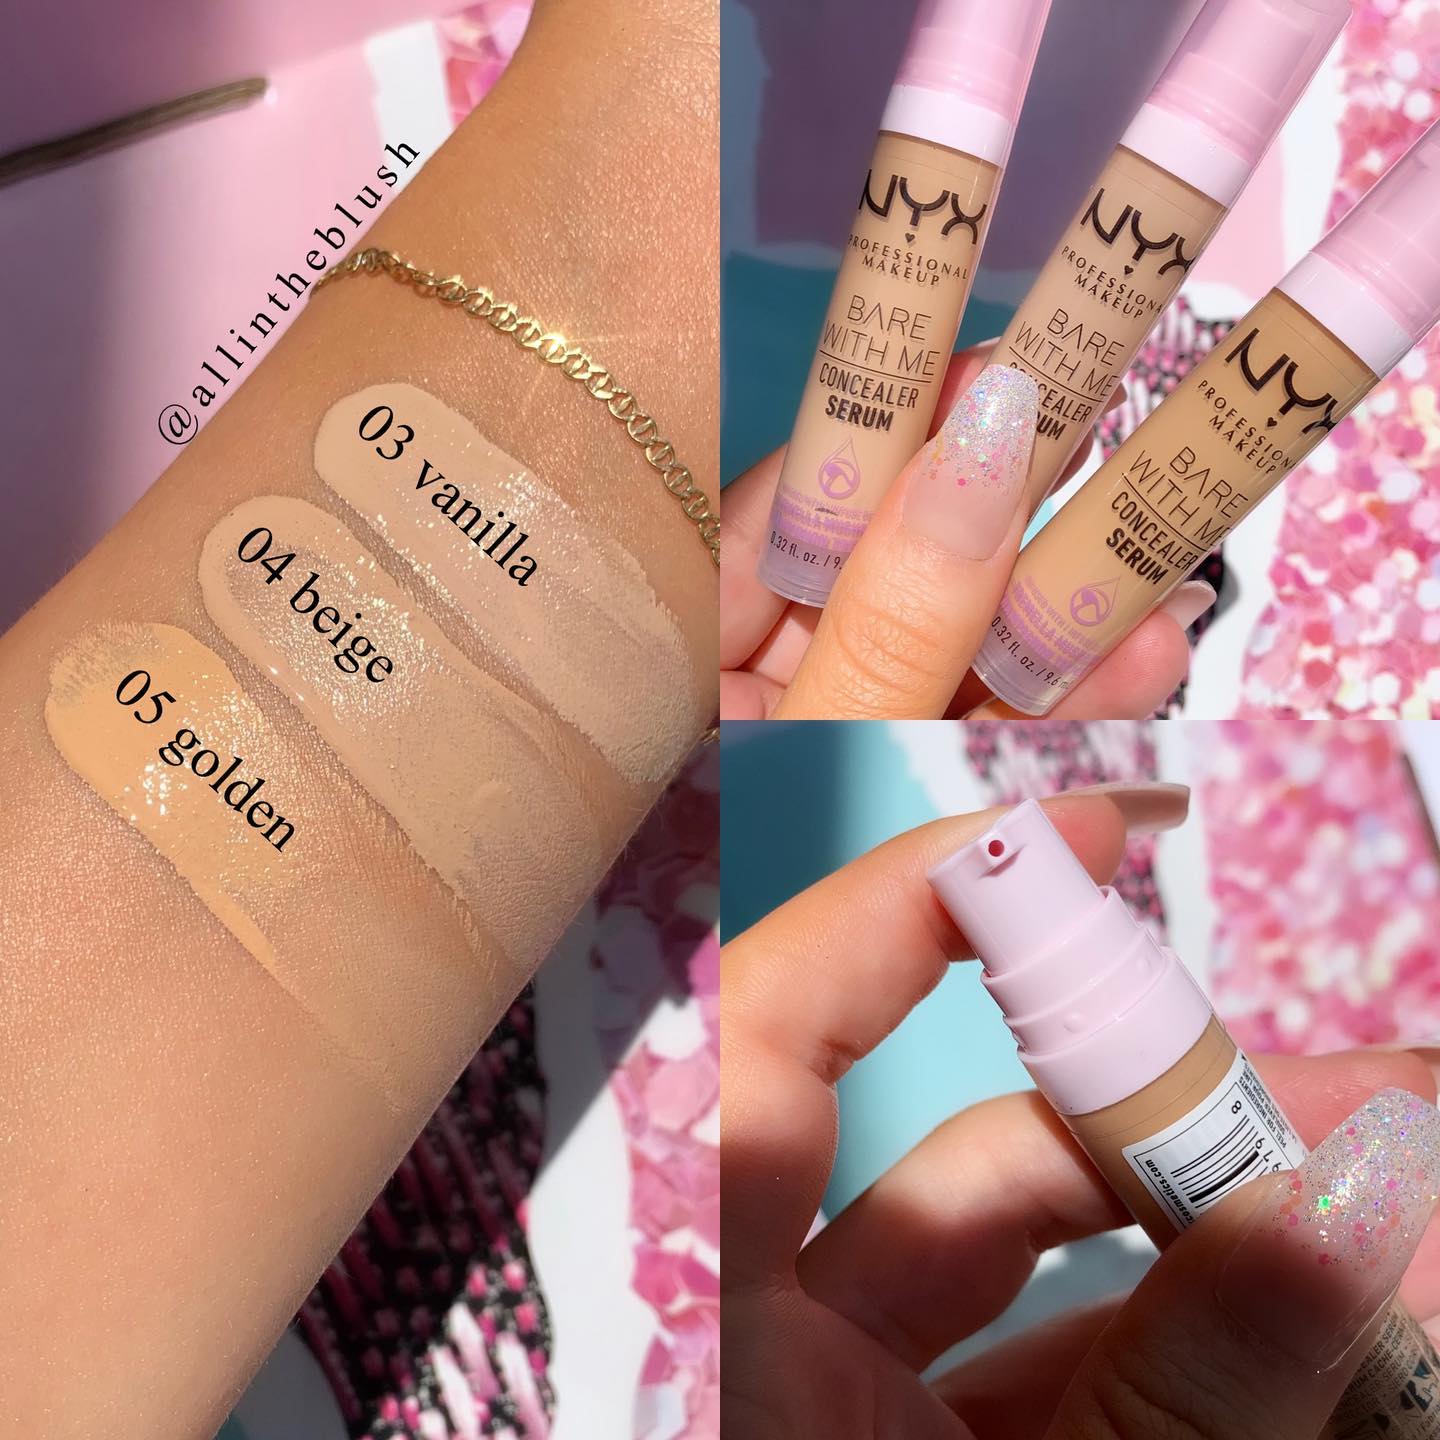 NEW Bare Me & Blush - from Review All Concealer NYX: Swatches In The With Serum